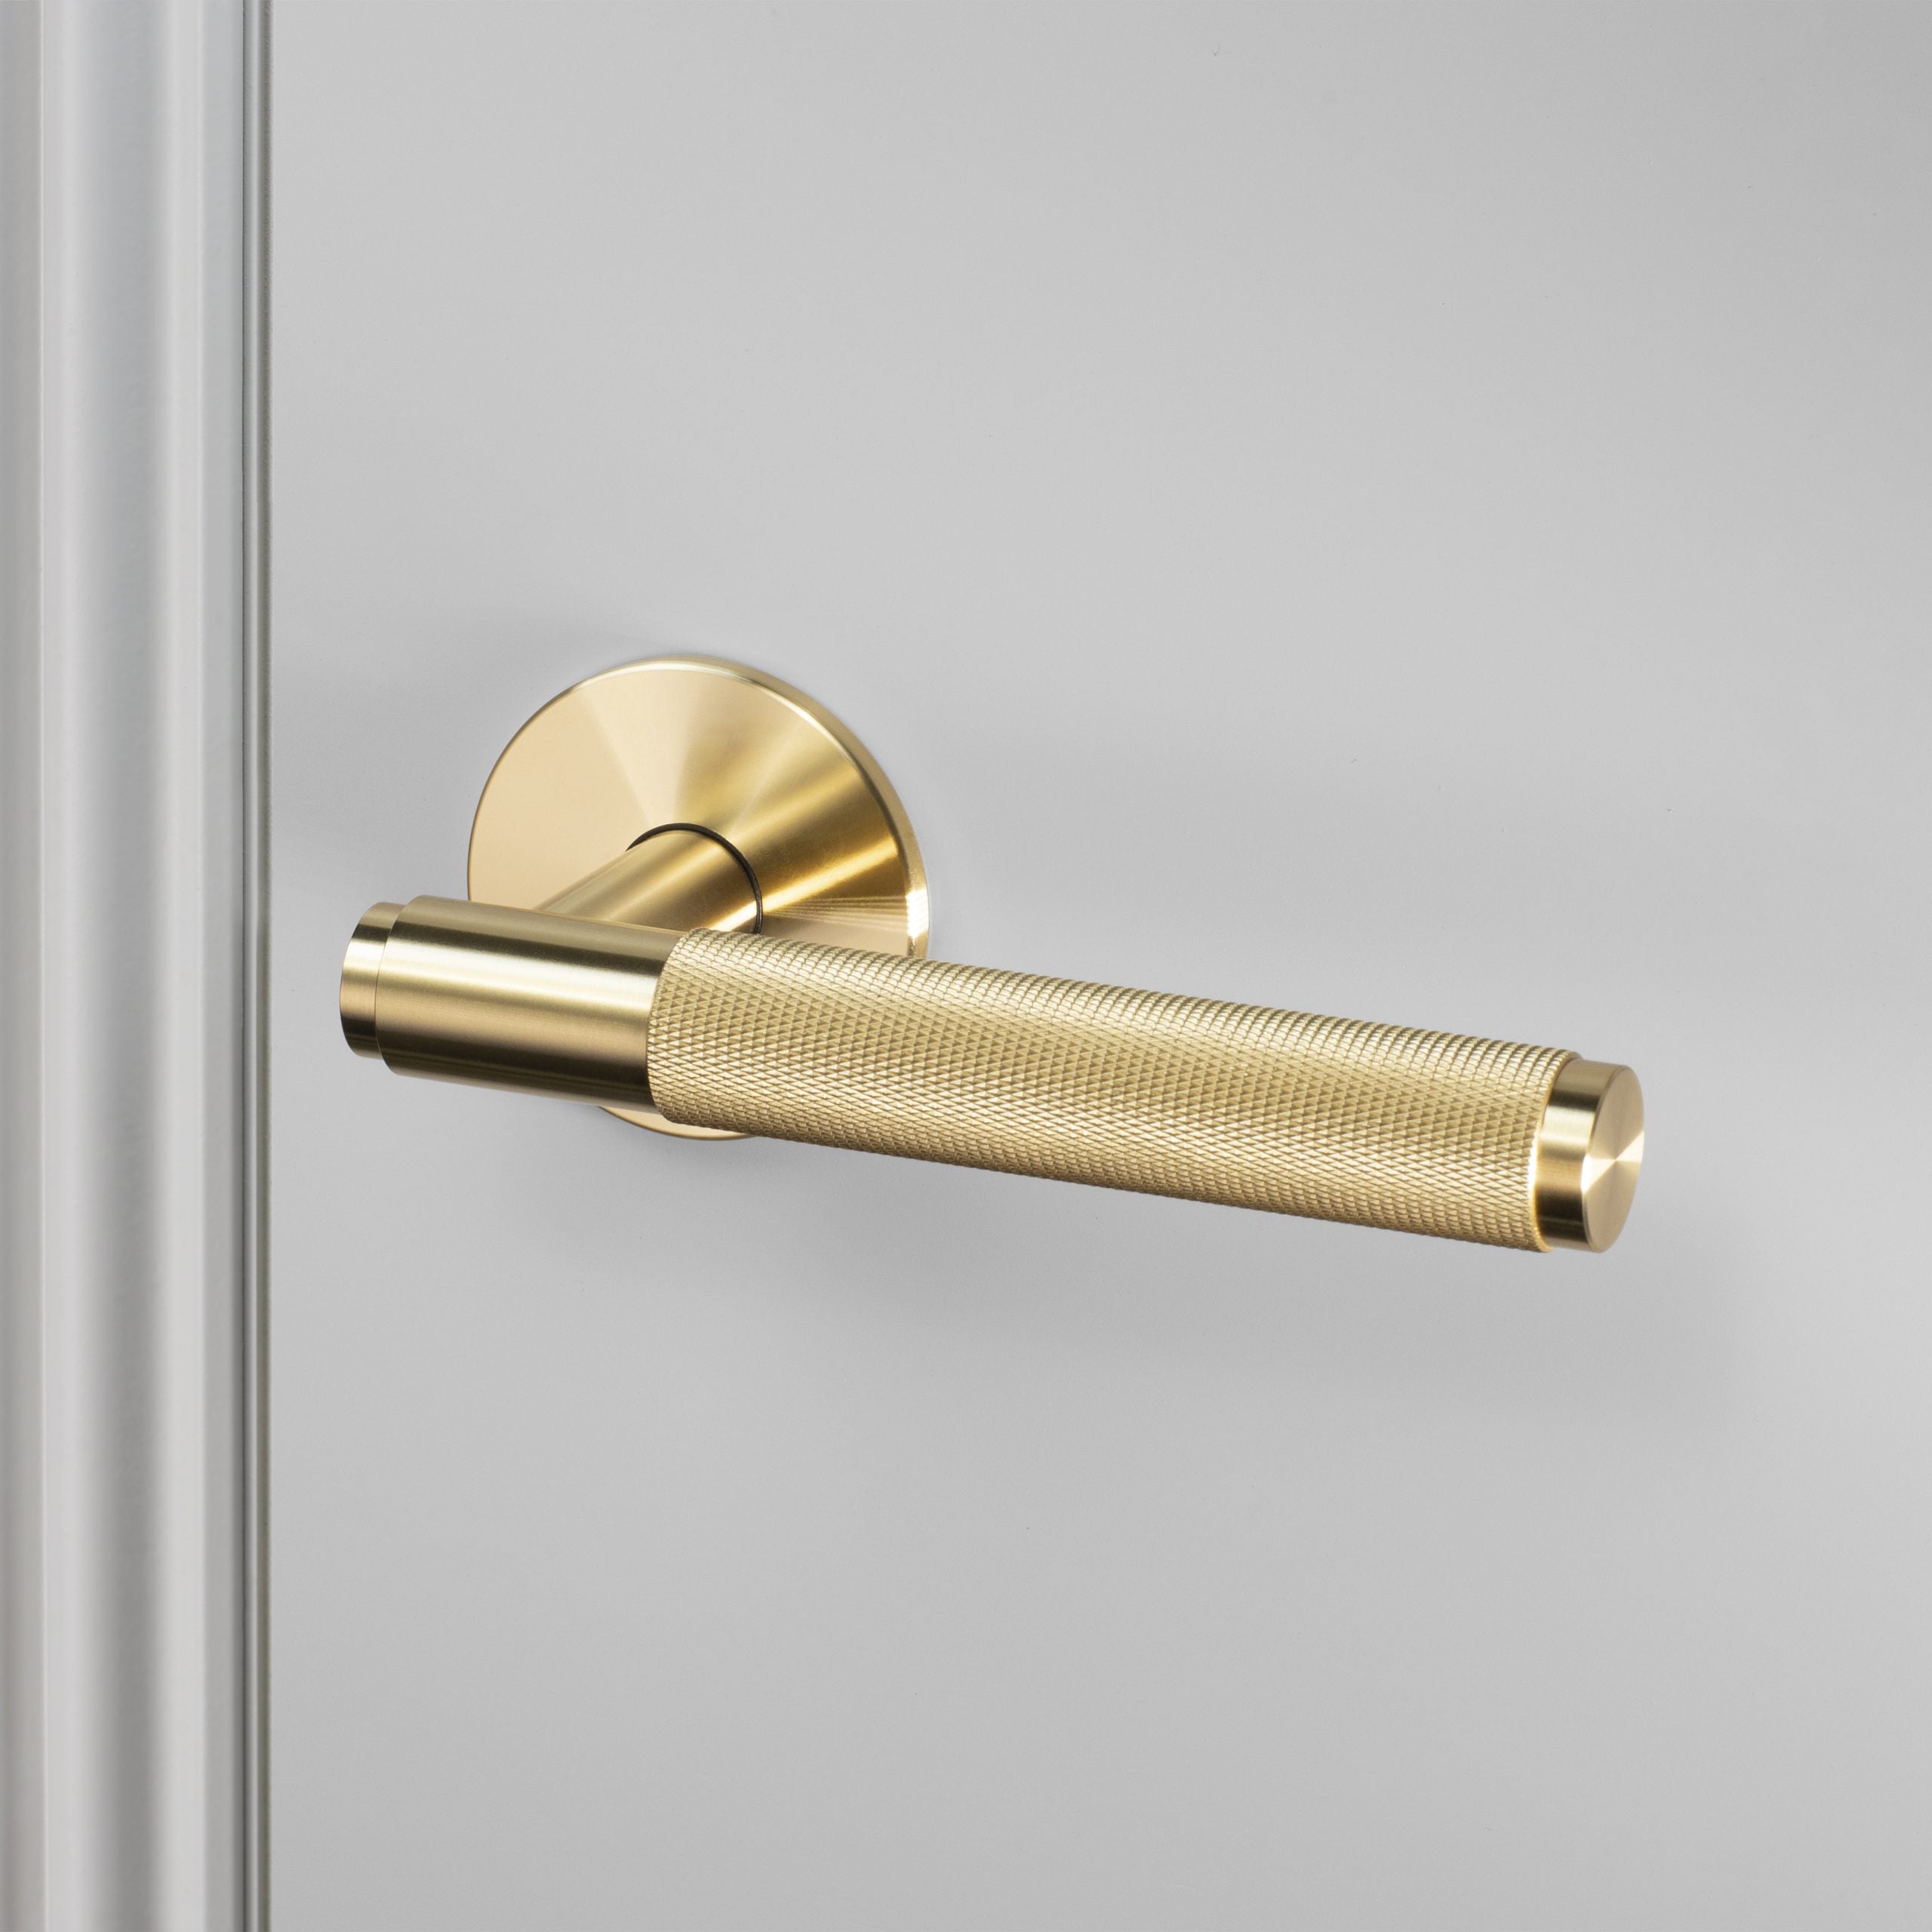 Buster + Punch Conventional Door Handle, Cross Design - FIXED TYPE Hardware Buster + Punch Brass  